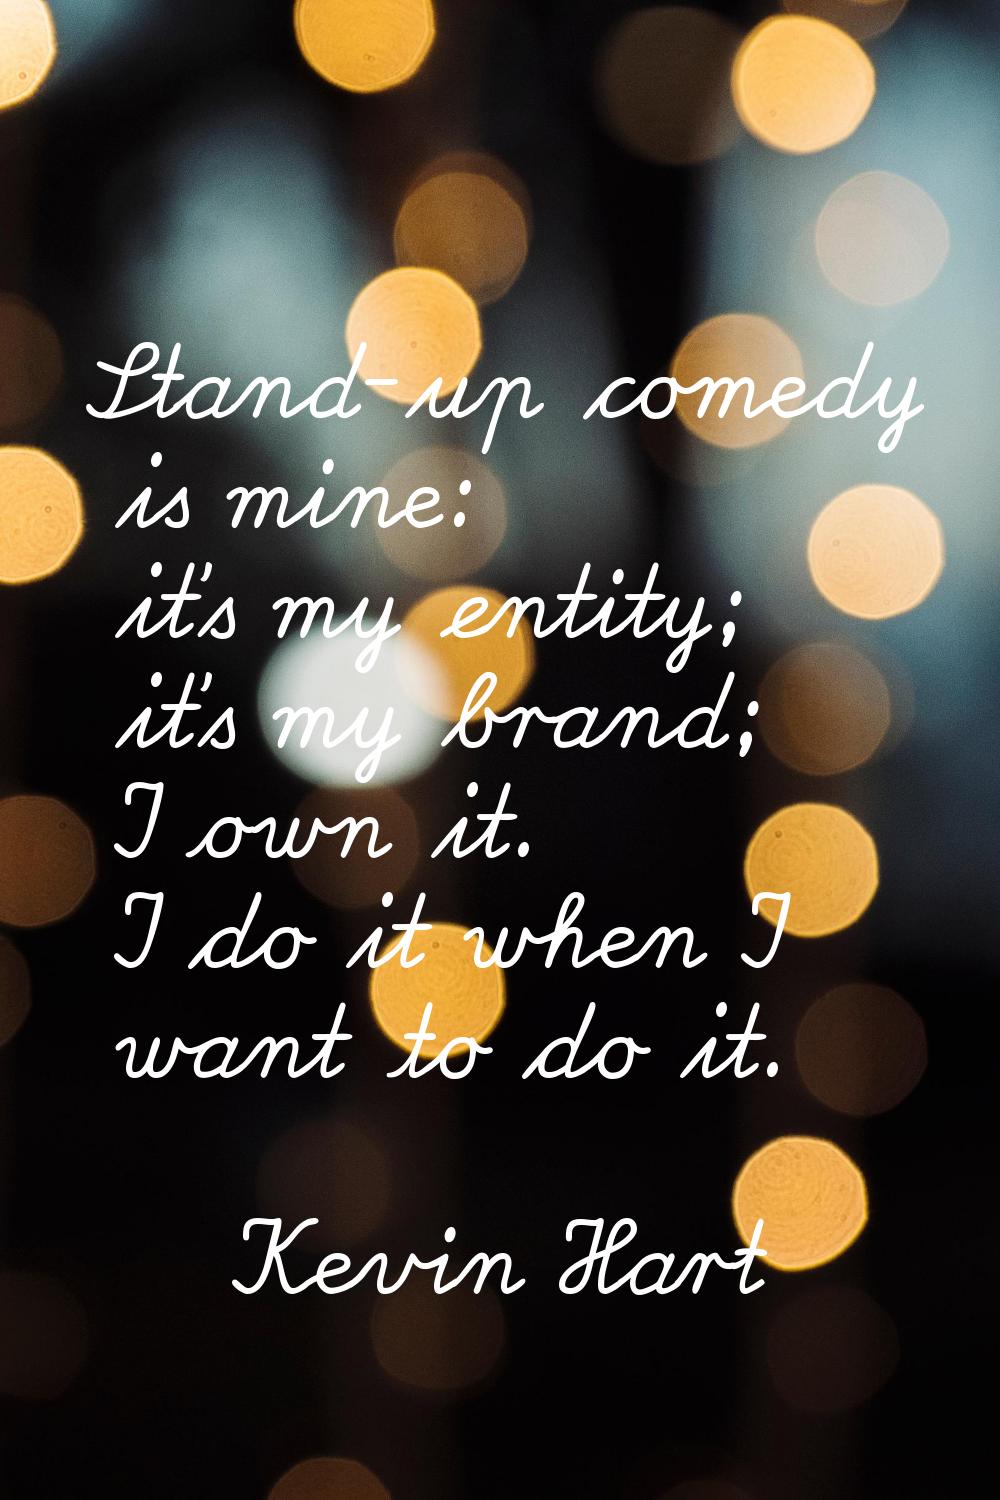 Stand-up comedy is mine: it's my entity; it's my brand; I own it. I do it when I want to do it.